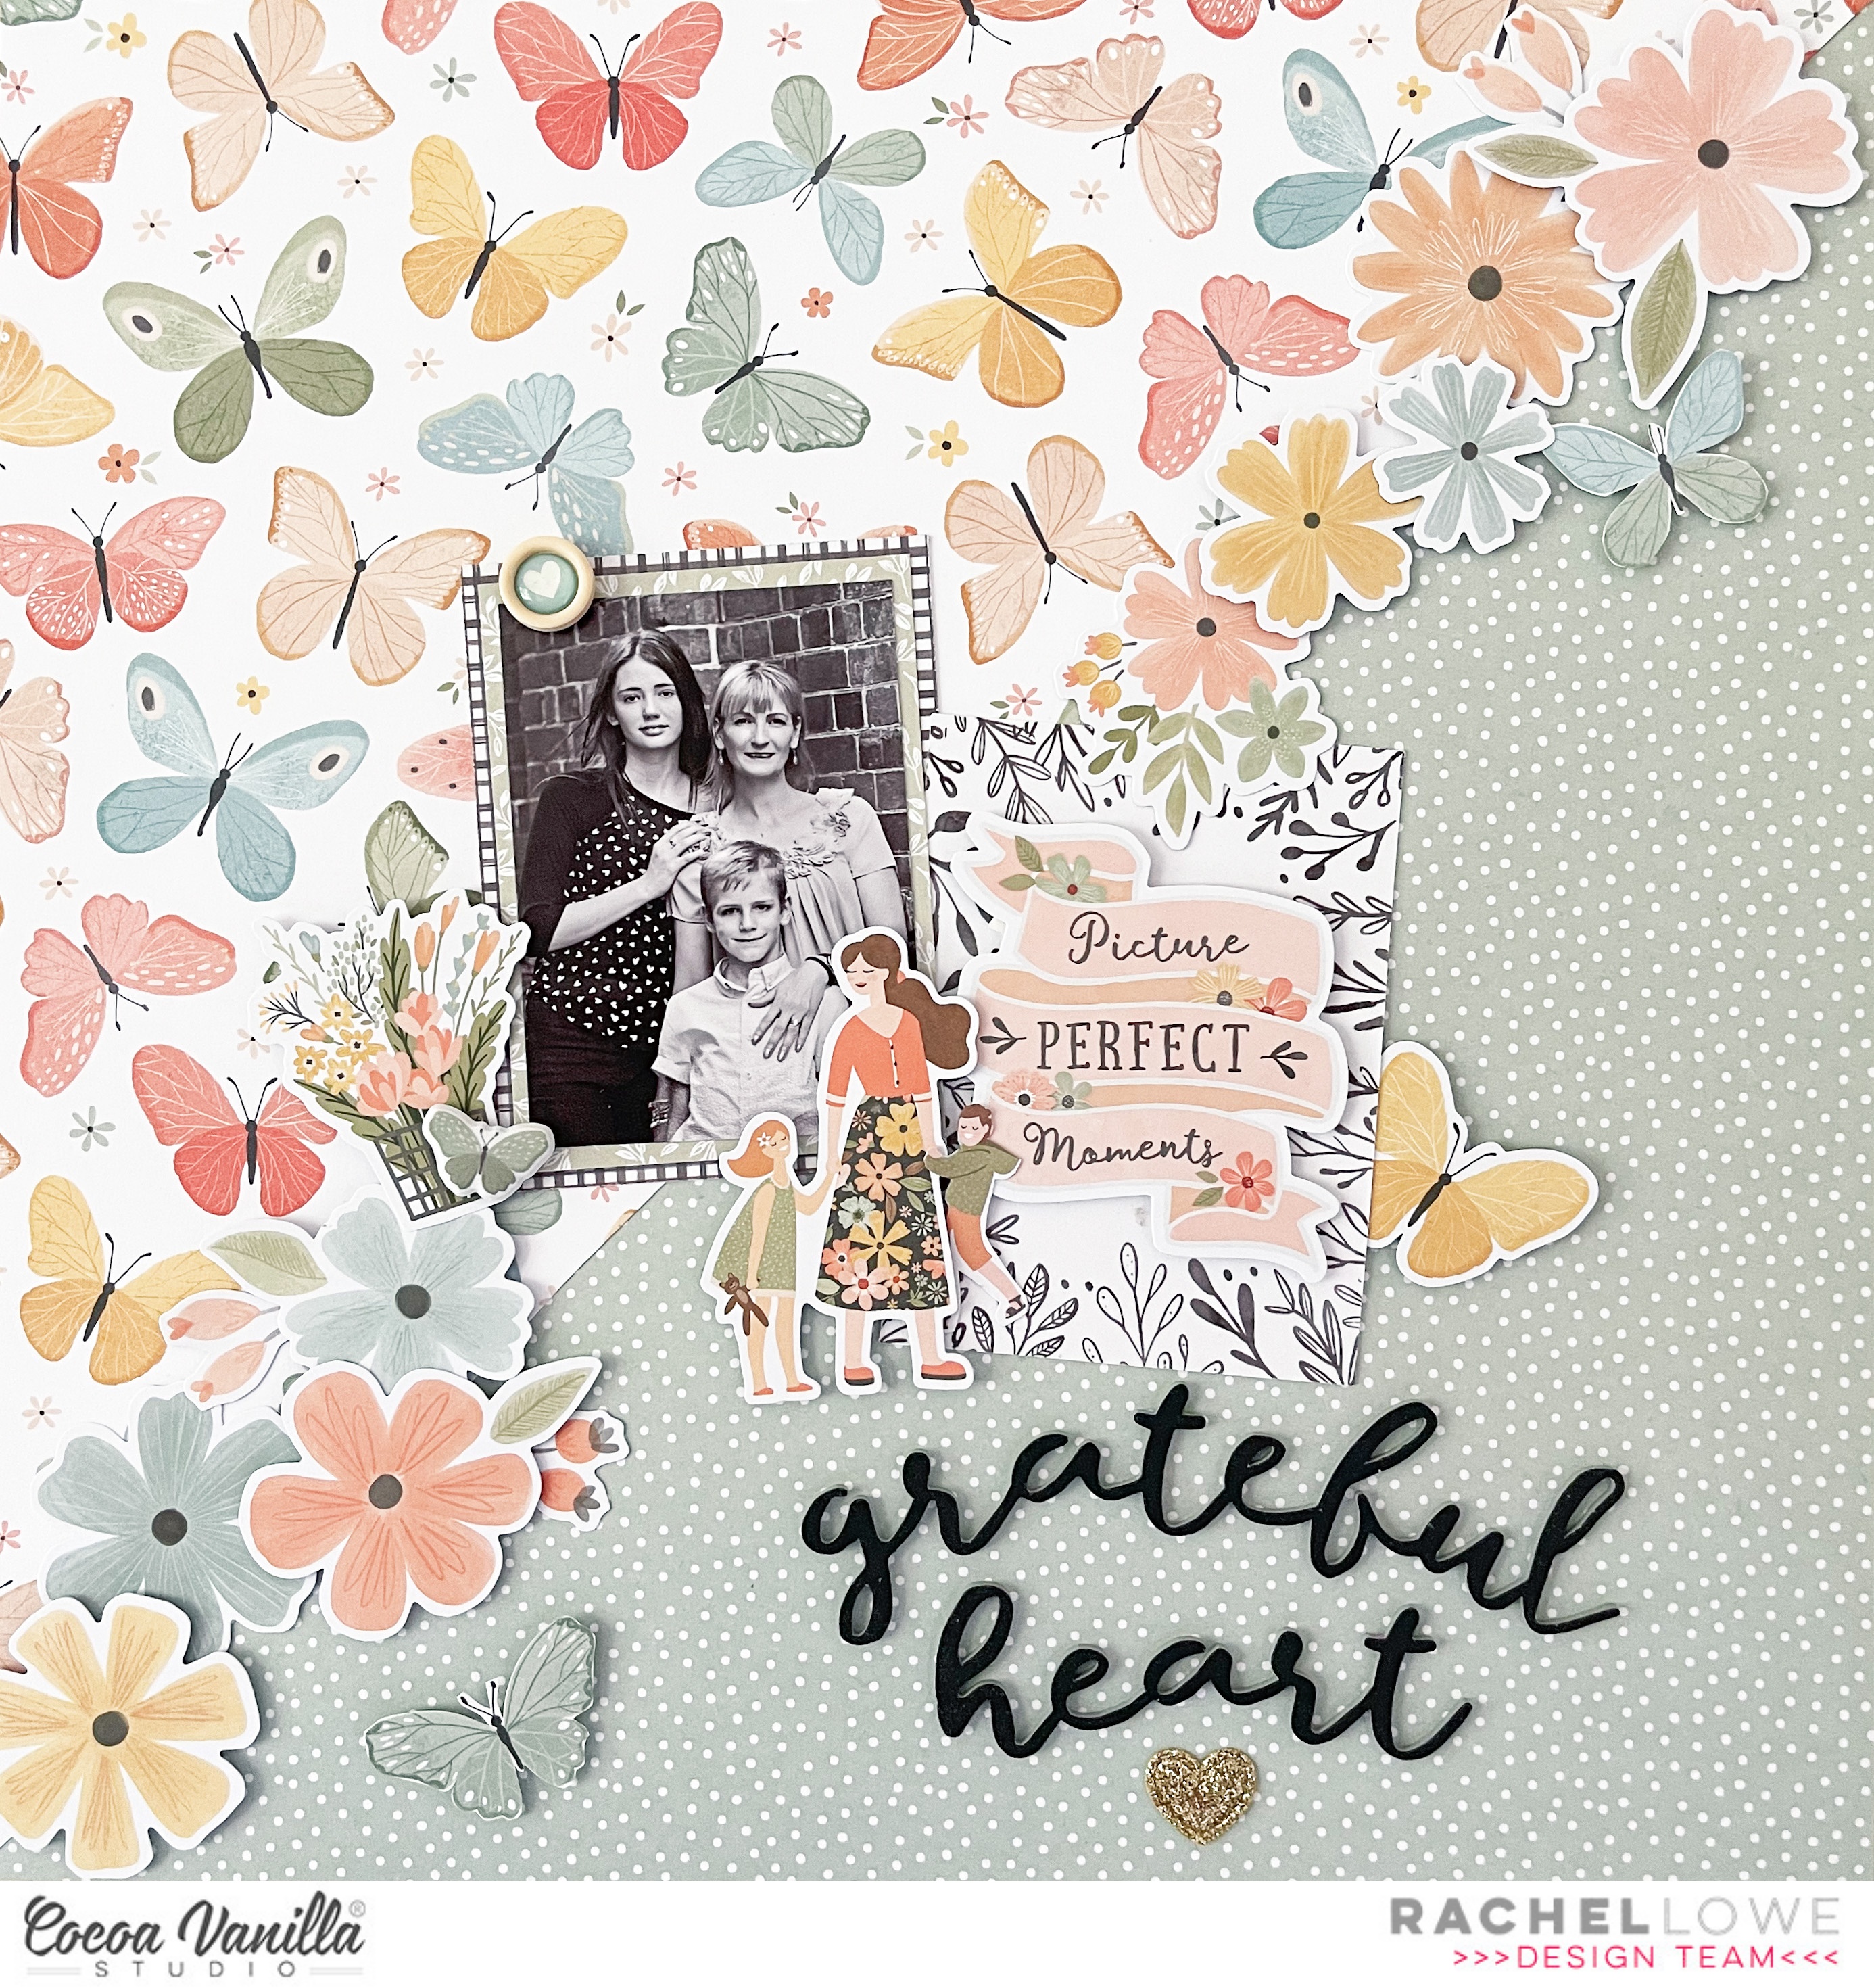 Grateful Heart | These Days Collection | Rachel Lowe